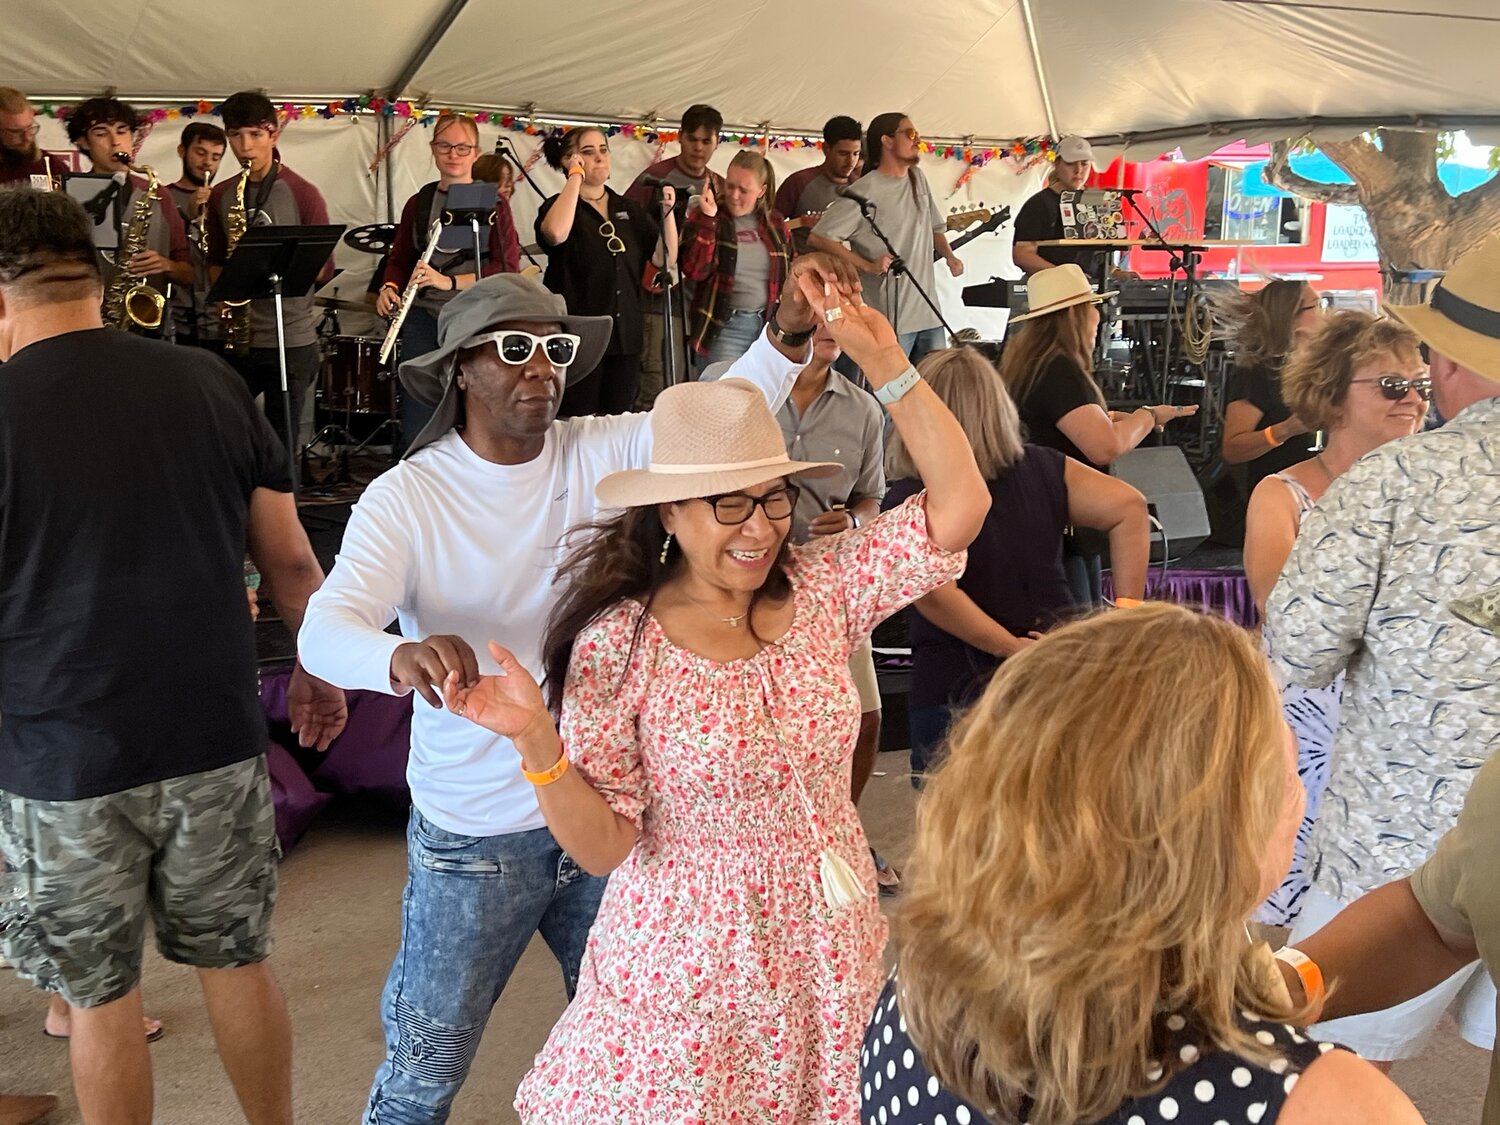 Relaxing on Labor Day, people enjoy their Monday afternoon at the New Mexico Harvest Wine Festival held at the Southern New Mexico Fairgrounds Sept. 2-4. New Mexico State University’s Proud Pete play a variety of covers as people dance the afternoon away.